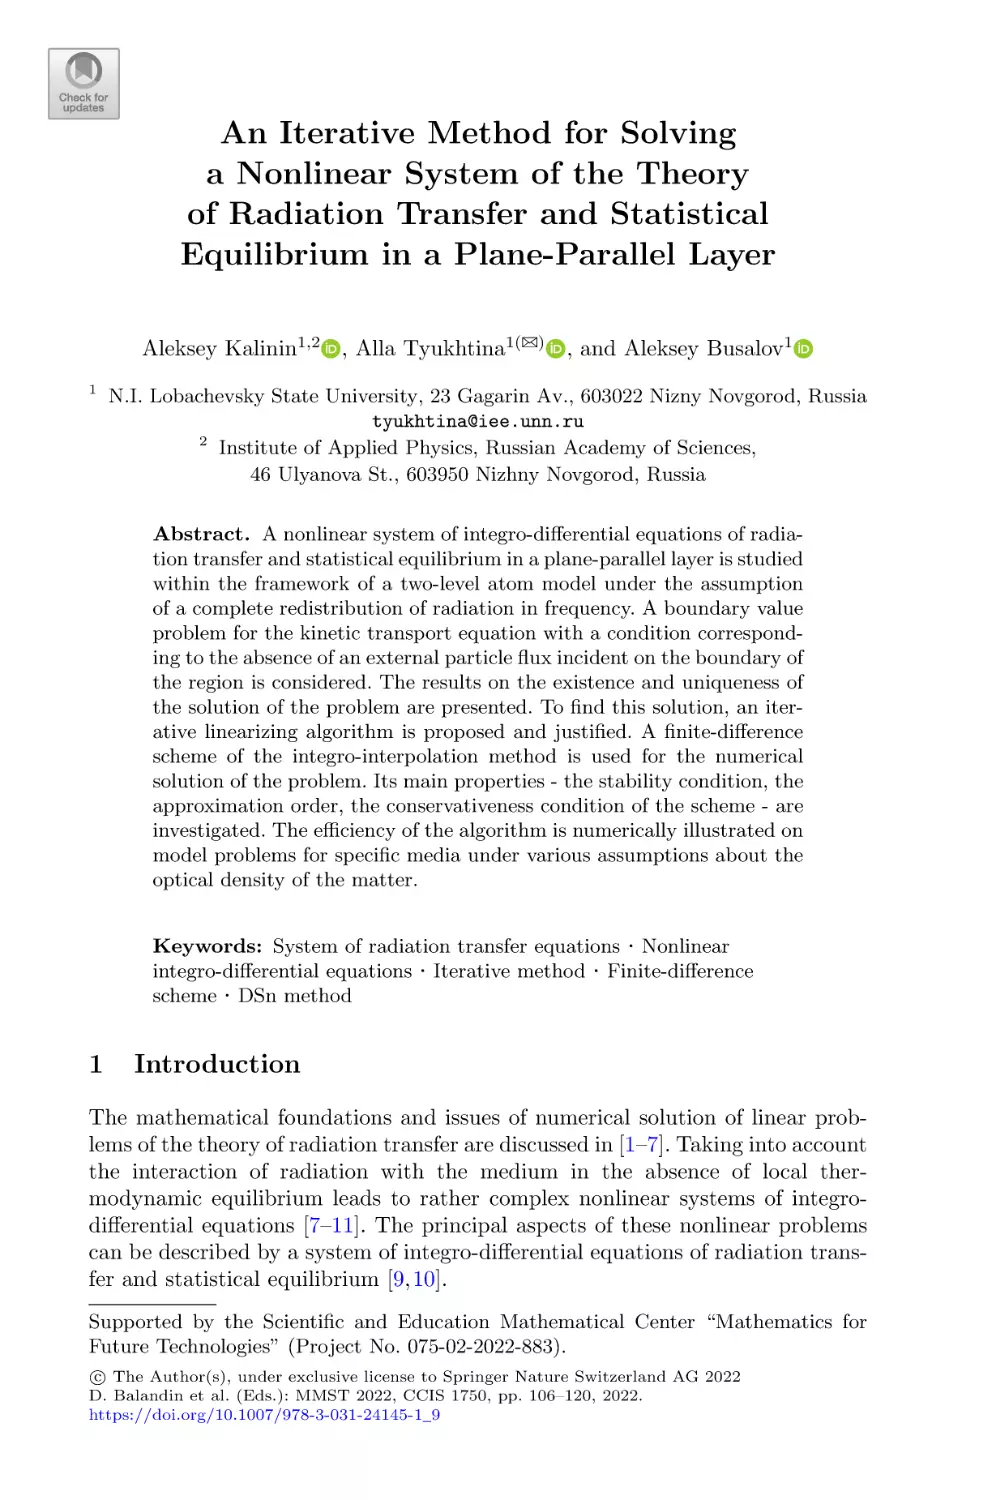 An Iterative Method for Solving a Nonlinear System of the Theory of Radiation Transfer and Statistical Equilibrium in a Plane-Parallel Layer
1 Introduction